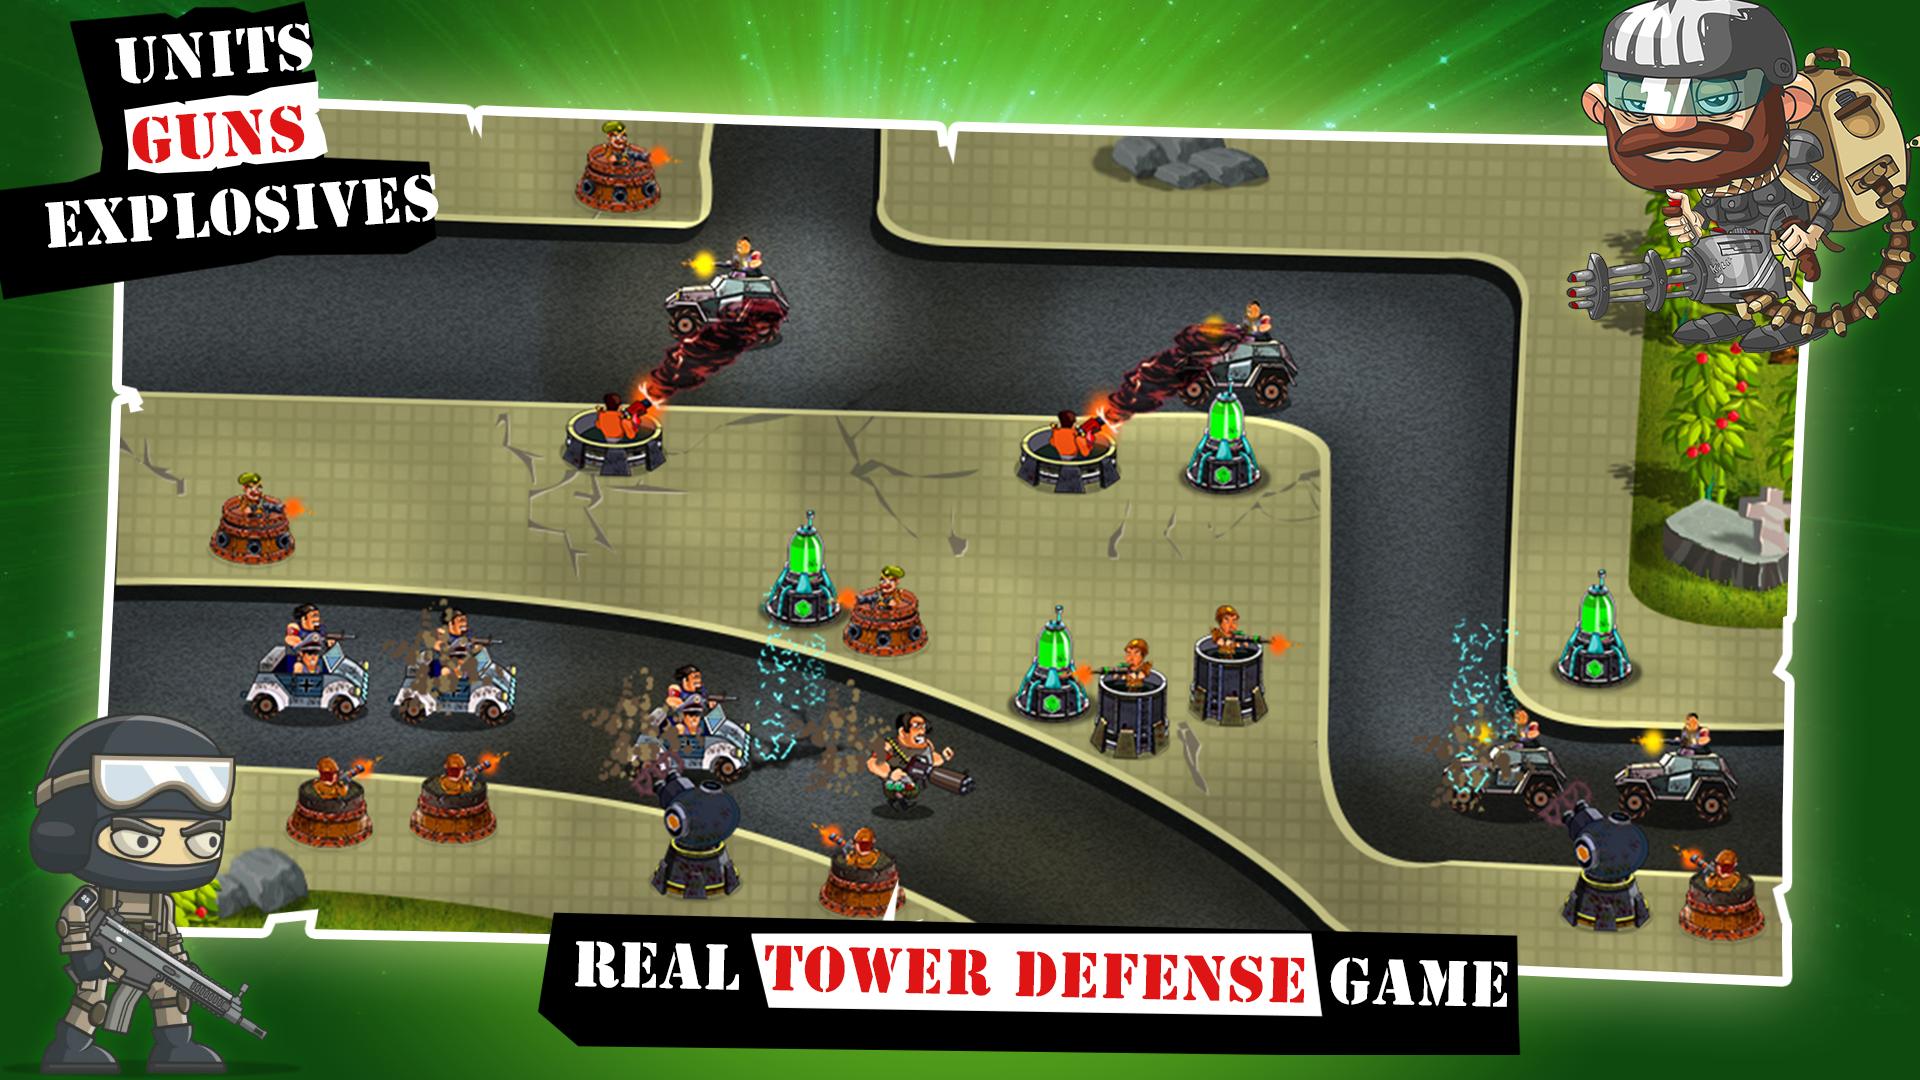 Master tower defense. Tower Defense Android. Юниты ТОВЕР дефенс. ТОВЕР дефенс Юнит командо. Allies vs Axis game.